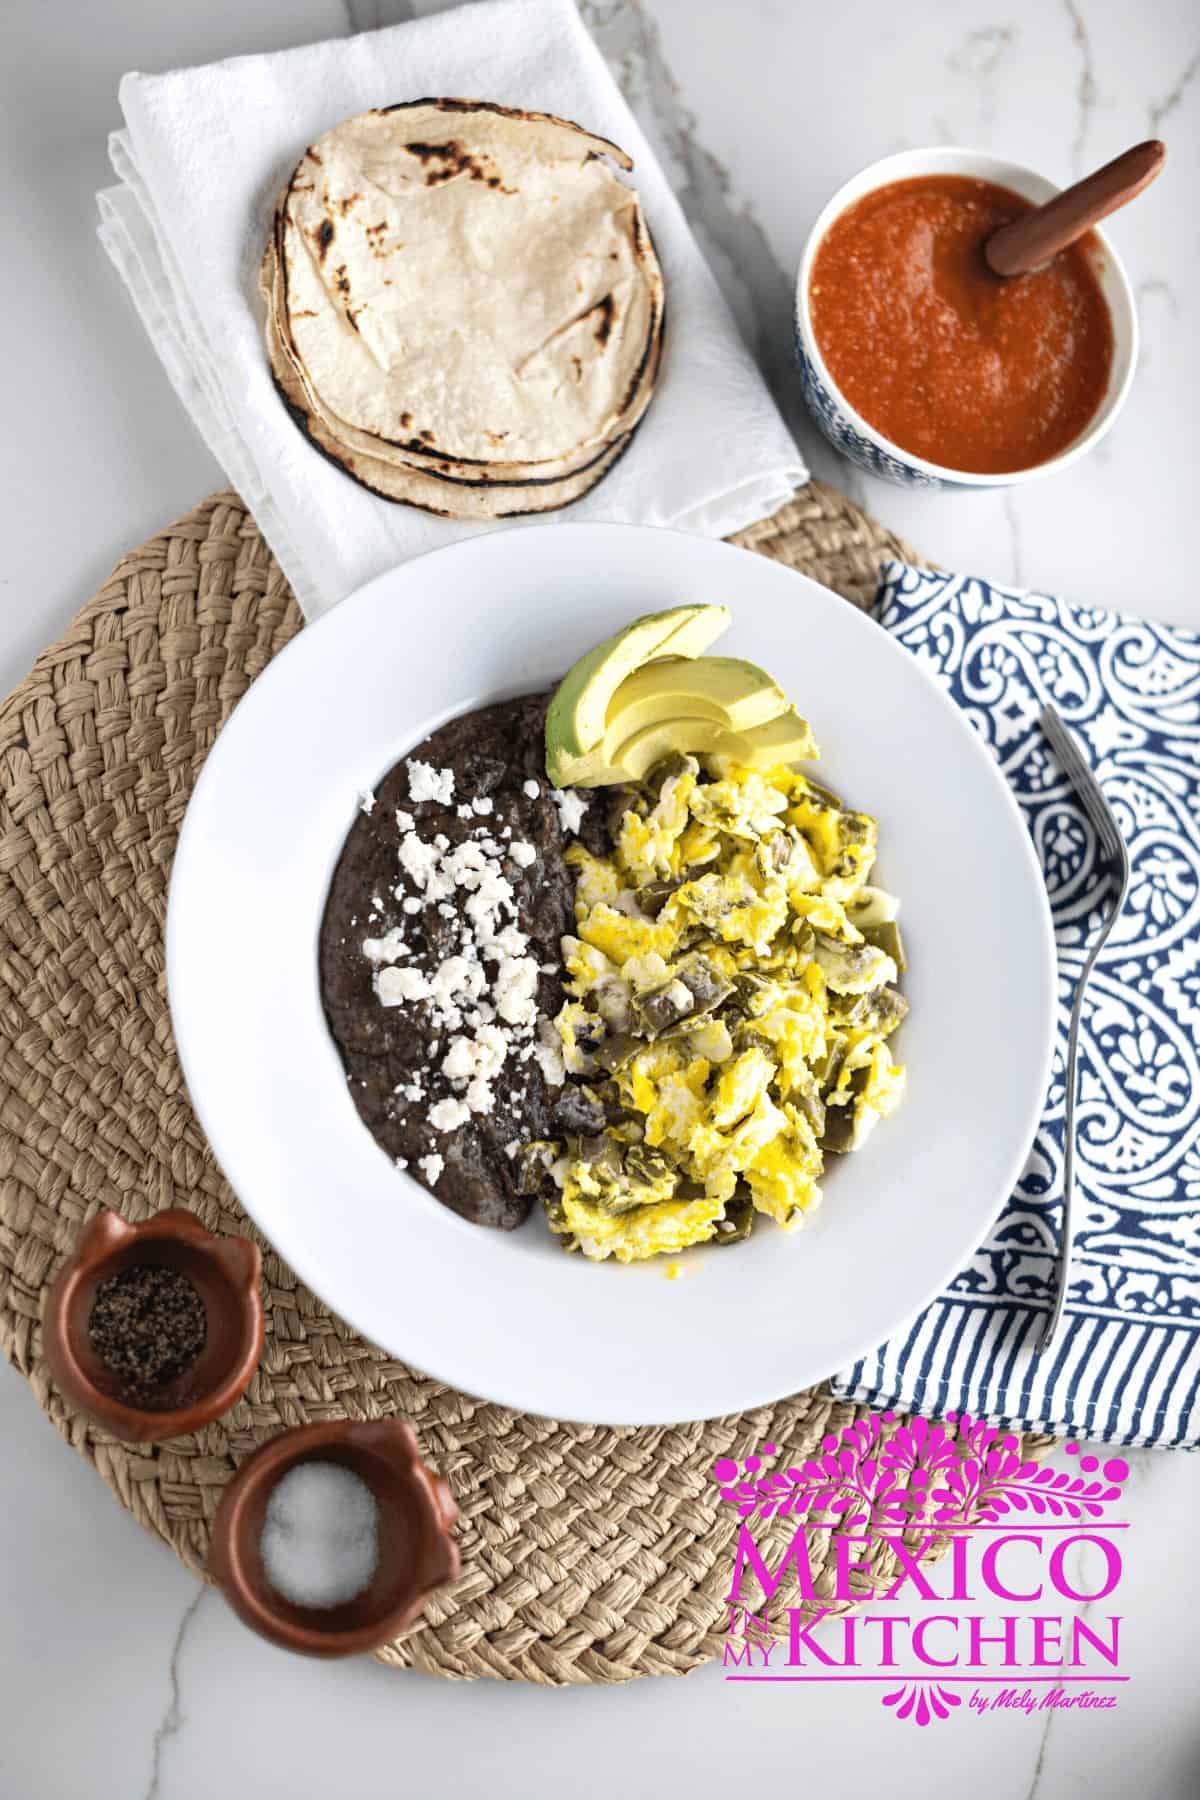 Serving of nopales con huevos next to black beans in a white plate.